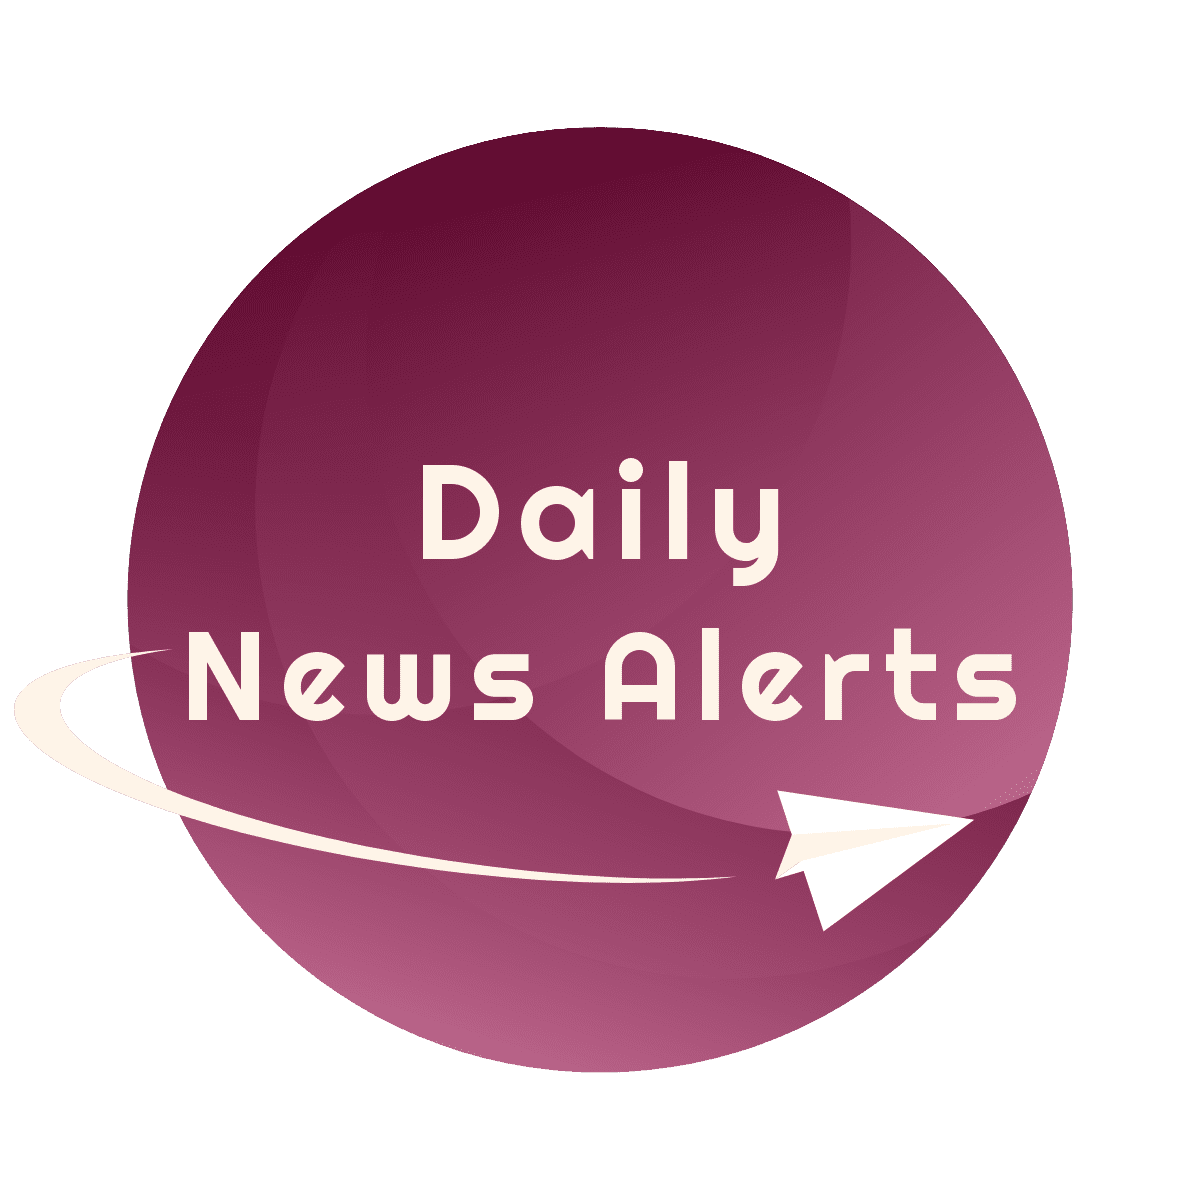 Daily News Alerts